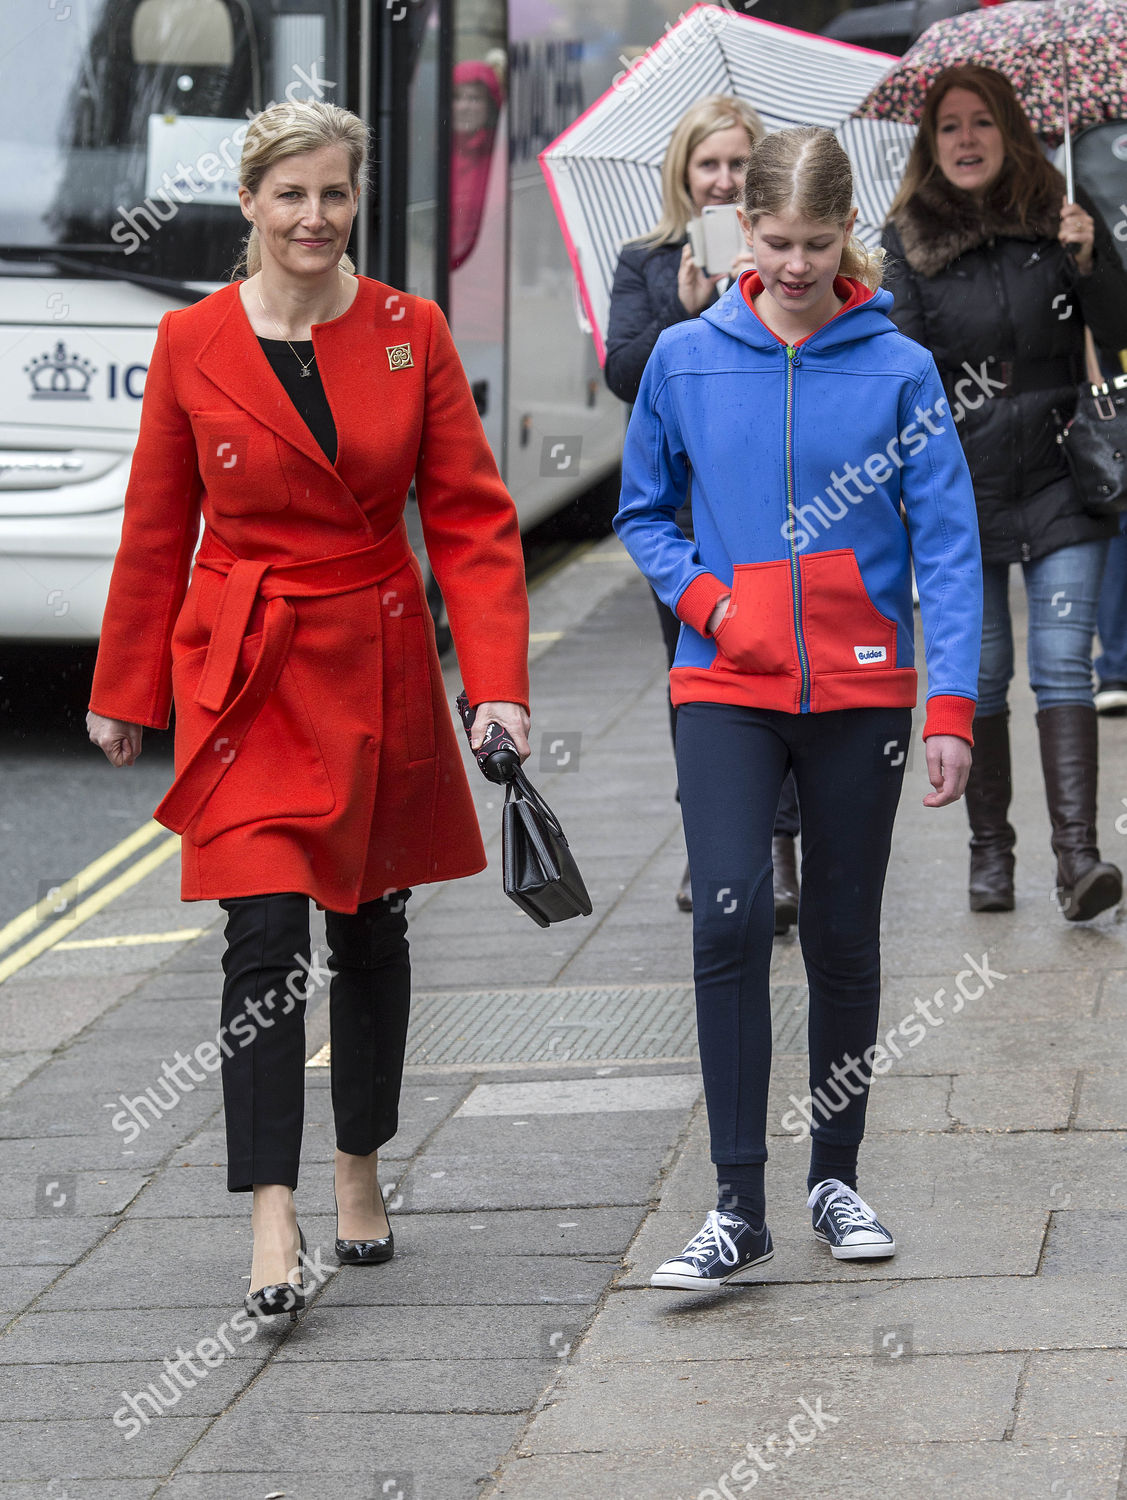 countess-of-wessex-opens-the-newly-refurbished-girlguiding-headquarters-london-britain-shutterstock-editorial-5647620n.jpg